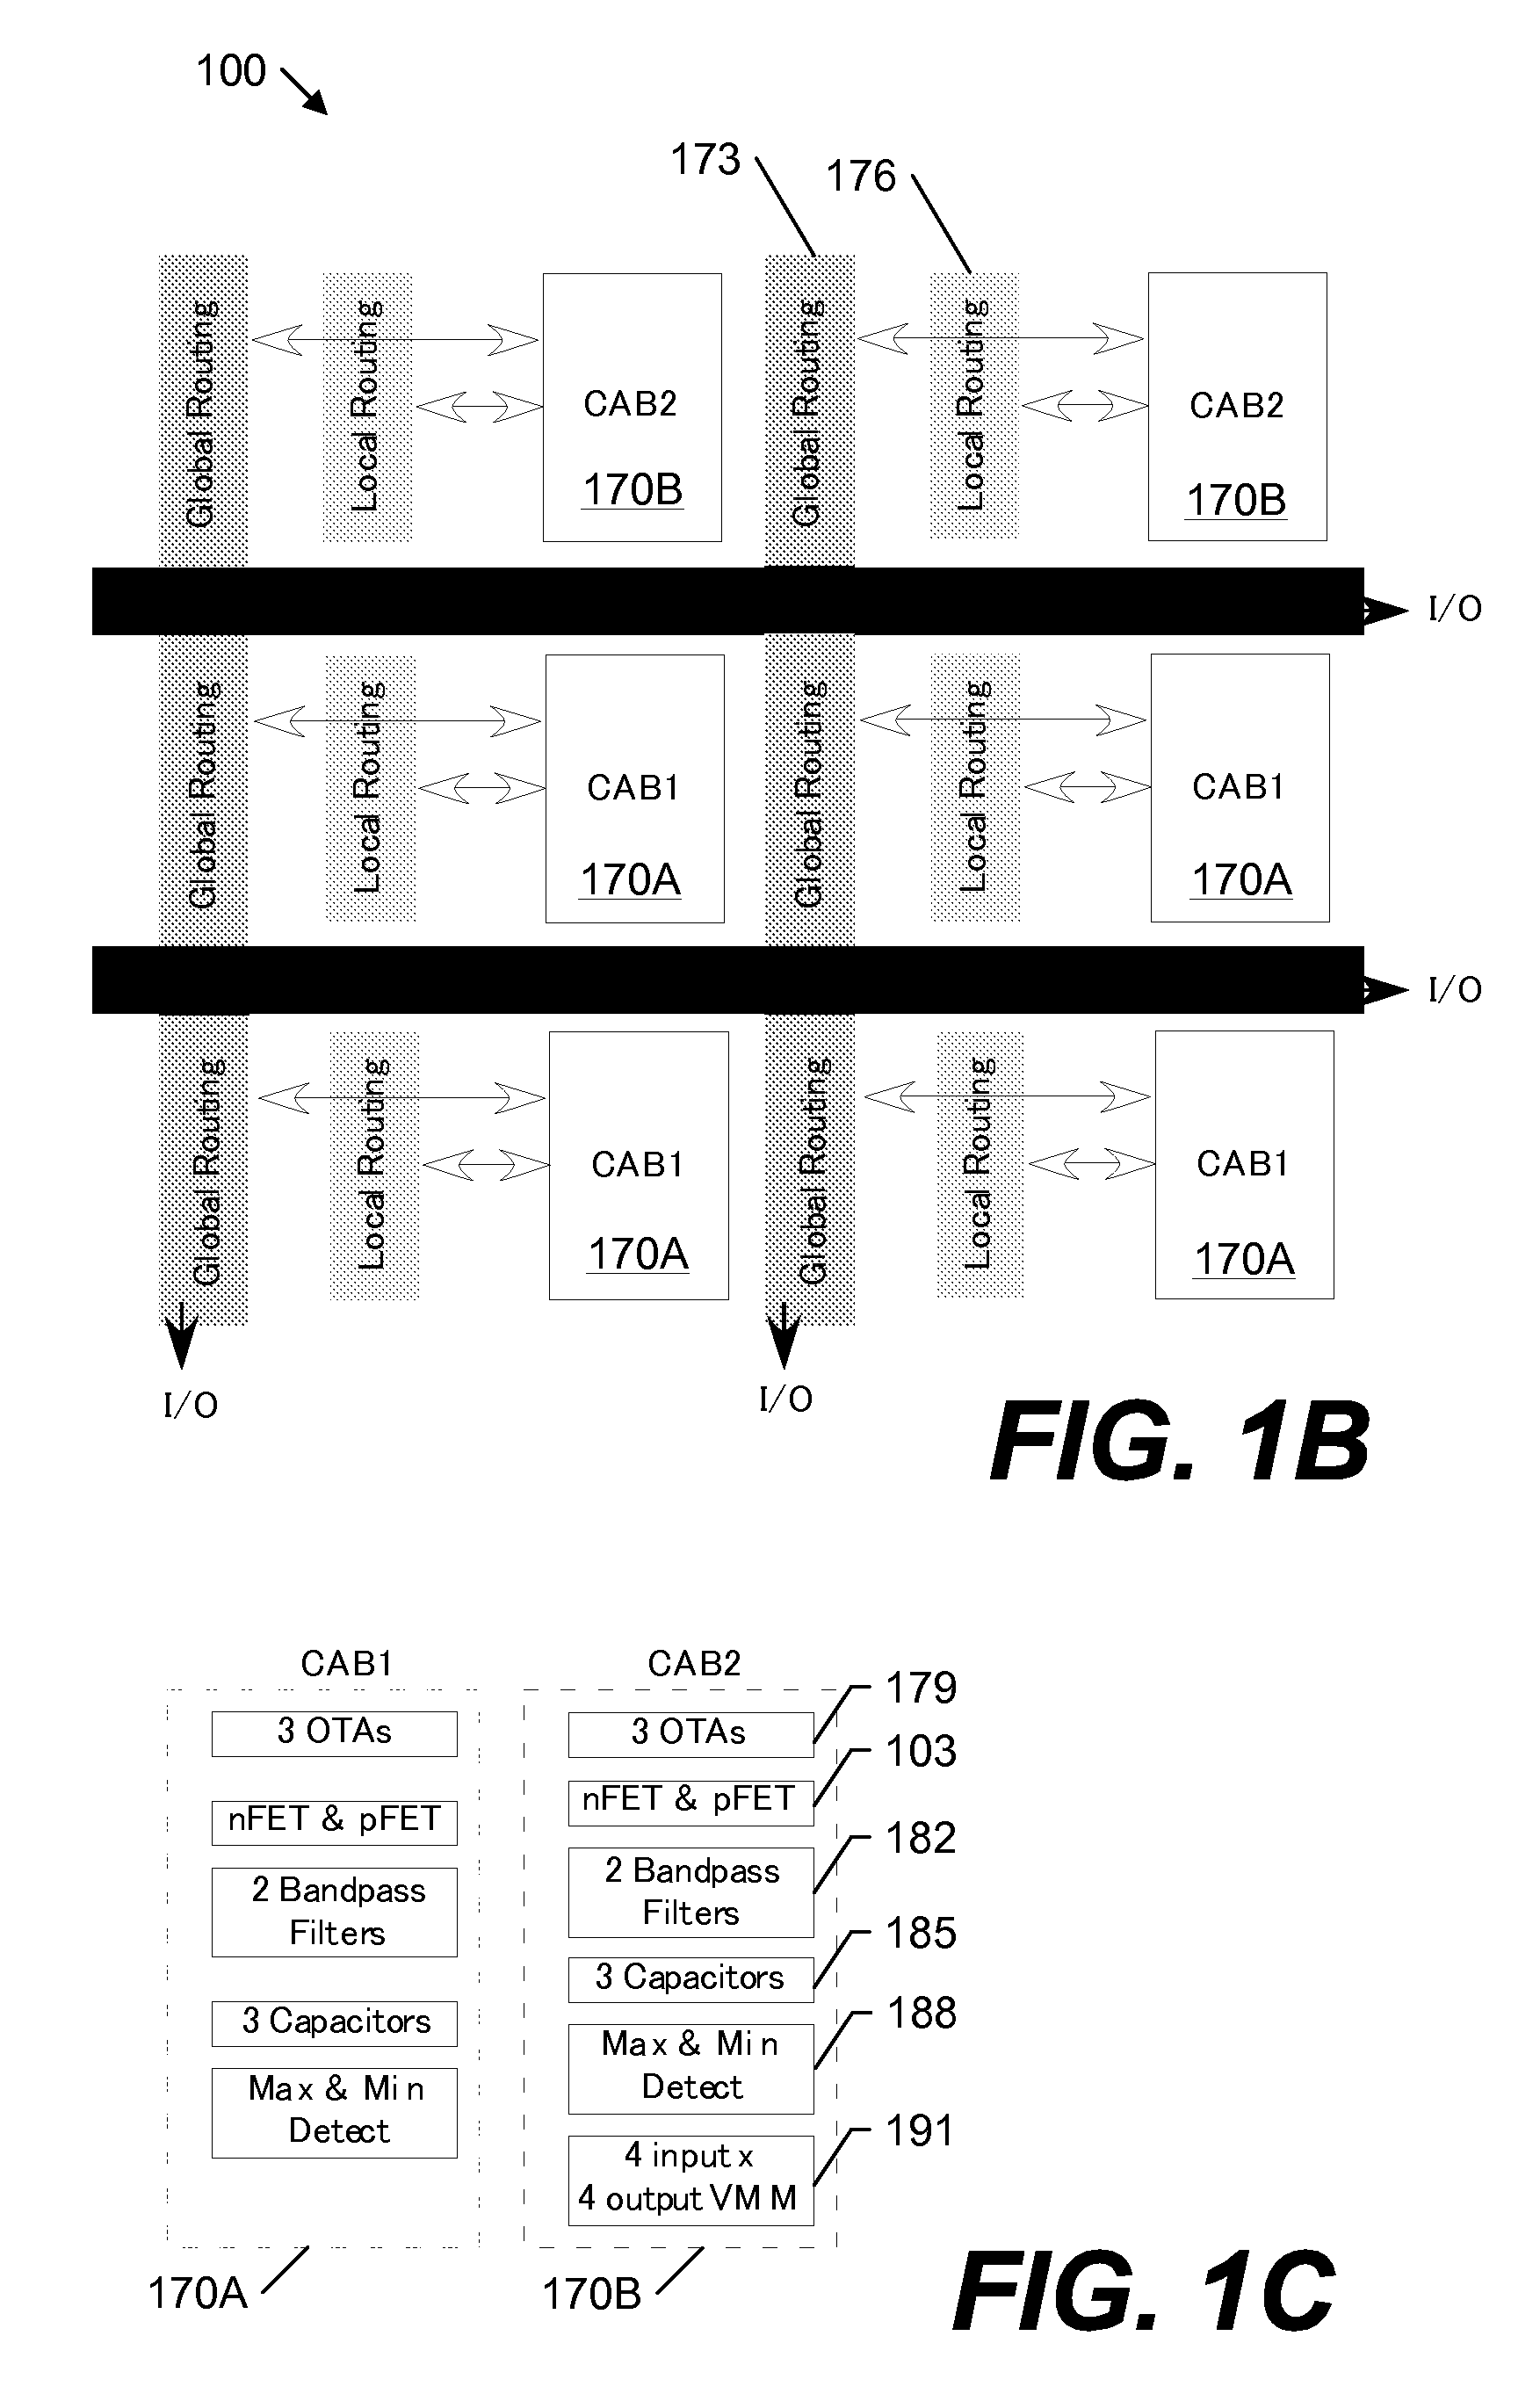 Systems and methods for programming large-scale field-programmable analog arrays